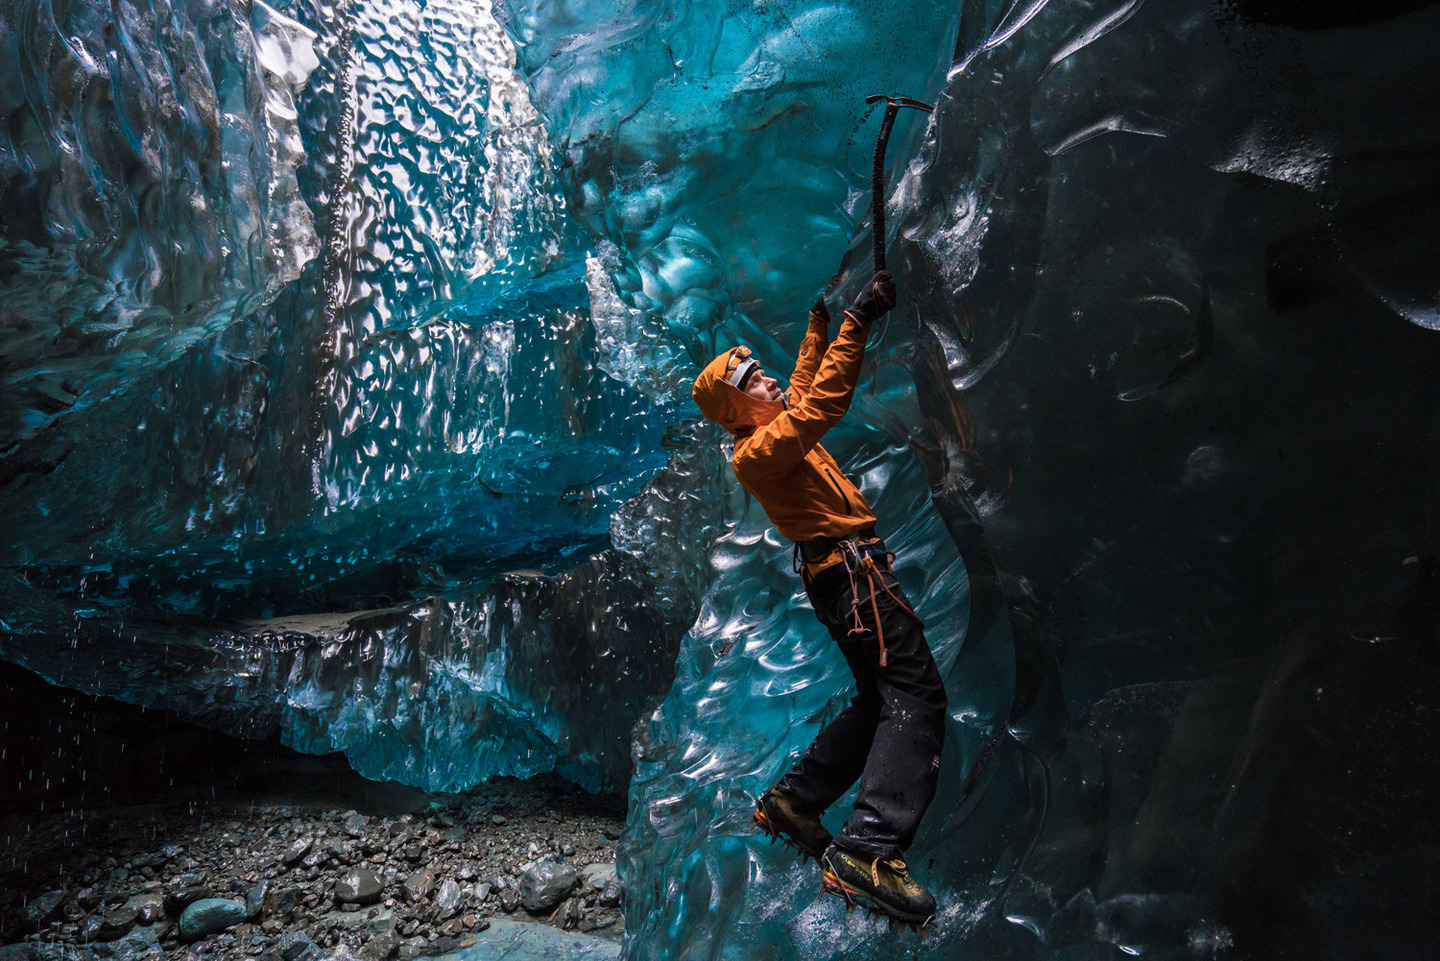 EMBARGOED FOR USE ONLINE AND PRINT UNTIL 00:01 26/11/15Guide Einar Runar Sigurdsson is seen ice climbing inside the 'Waterfall Cave' Photographer explores Vatnaj&ouml;kull glacie using Sony's back-illuminated full-frame sensor, Iceland - 25 Nov 2015 *Full story: http://www.rexfeatures.com/nanolink/rm22 Photographer Mikael Buck with assistance from renowned local Icelandic guide Einar Runar Sigurdsson, explored the frozen world of Vatnaj&ouml;kull glacier in Iceland using Sony's world first back-illuminated full-frame sensor, which features in the 7R II camera. His images were taken without use of a tripod or any image stitching techniques in photoshop. This was made possible through Sony's new sensor technology, allowing incredibly detailed low-light hand held photography. Previously images this detailed would have required carrying bulky equipment to the caves, some of which can require hiking and climbing over a glacier for up to two hours to to access. The images were taken without the use of any external sources - just the natural light that filters through the ice caves.  (Rex Features via AP Images)